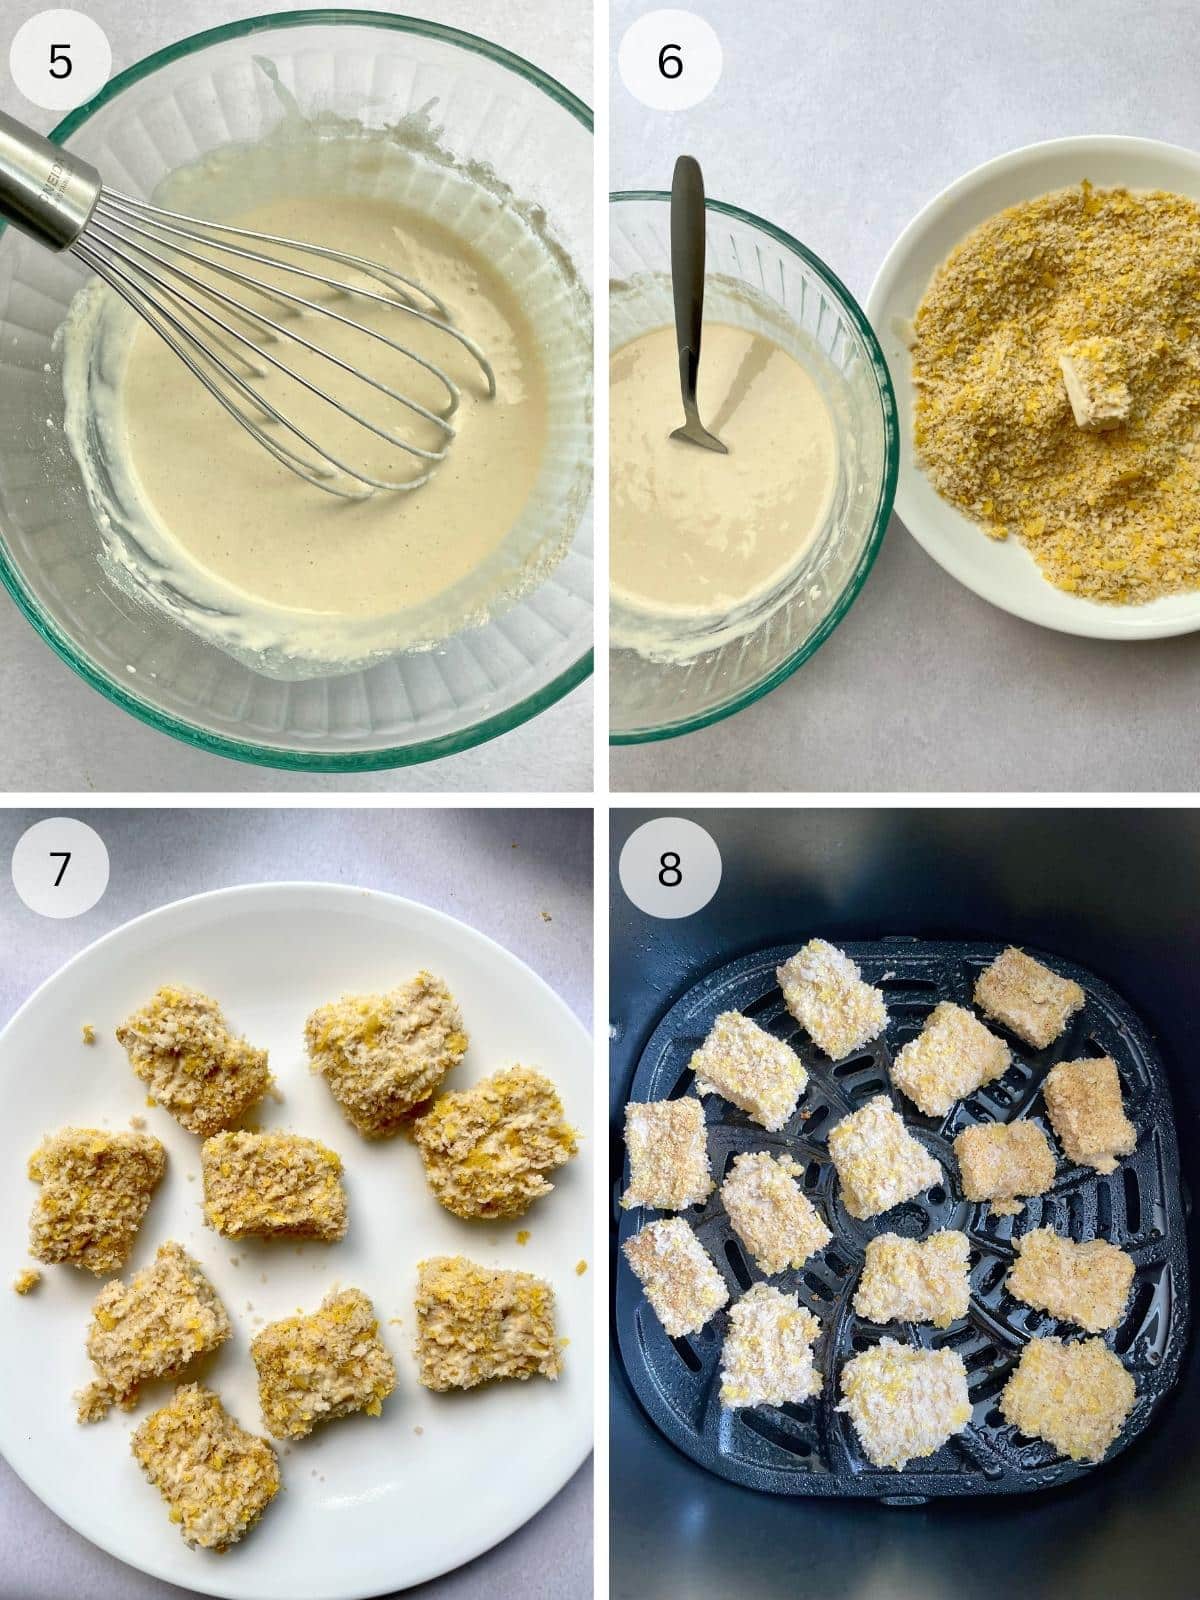 How to bread and air fry breaded tofu.